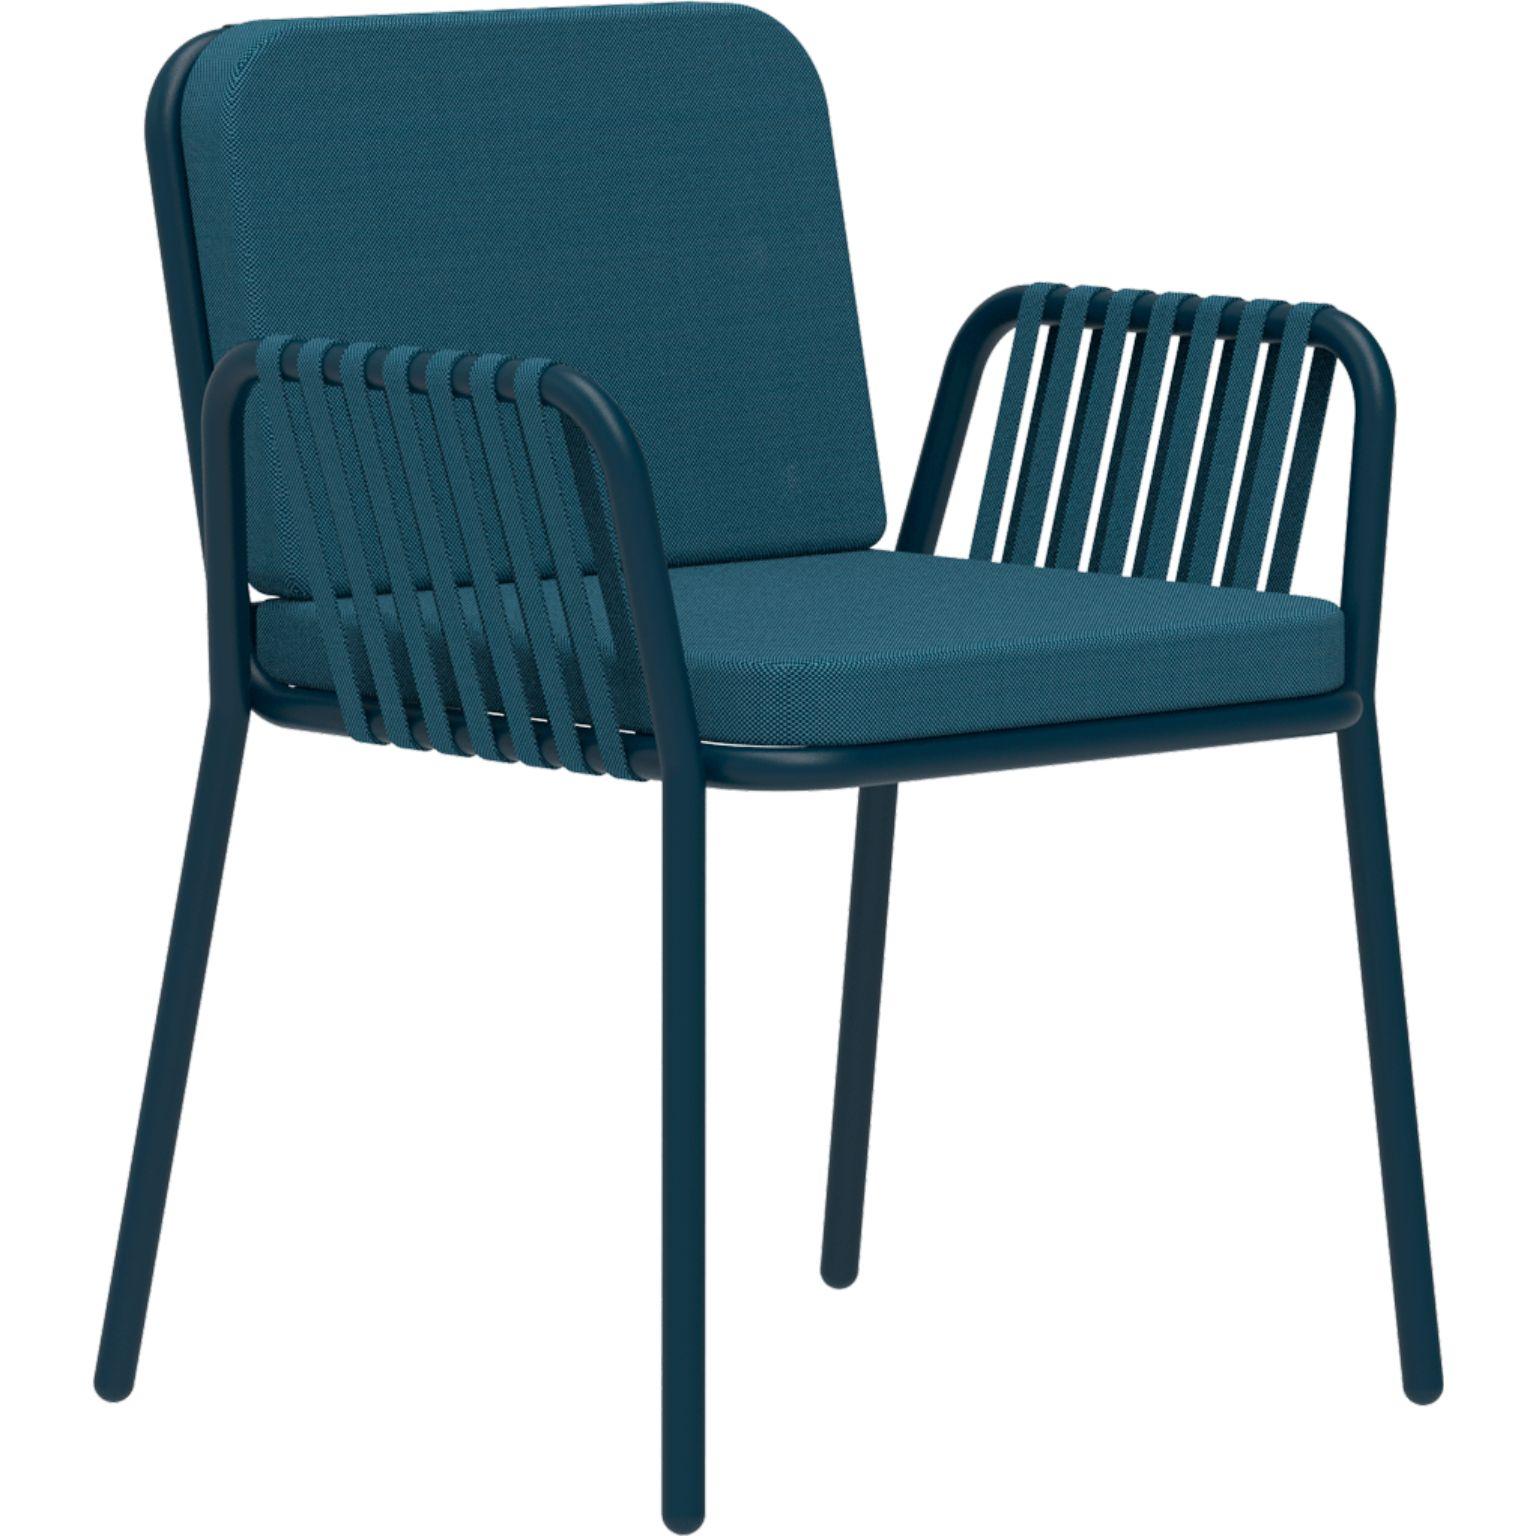 Ribbons Navy Armchair by MOWEE
Dimensions: D60 x W62 x H83 cm (seat height 48).
Material: Aluminum and upholstery.
Weight: 5 kg.
Also available in different colors and finishes.

An unmistakable collection for its beauty and robustness. A